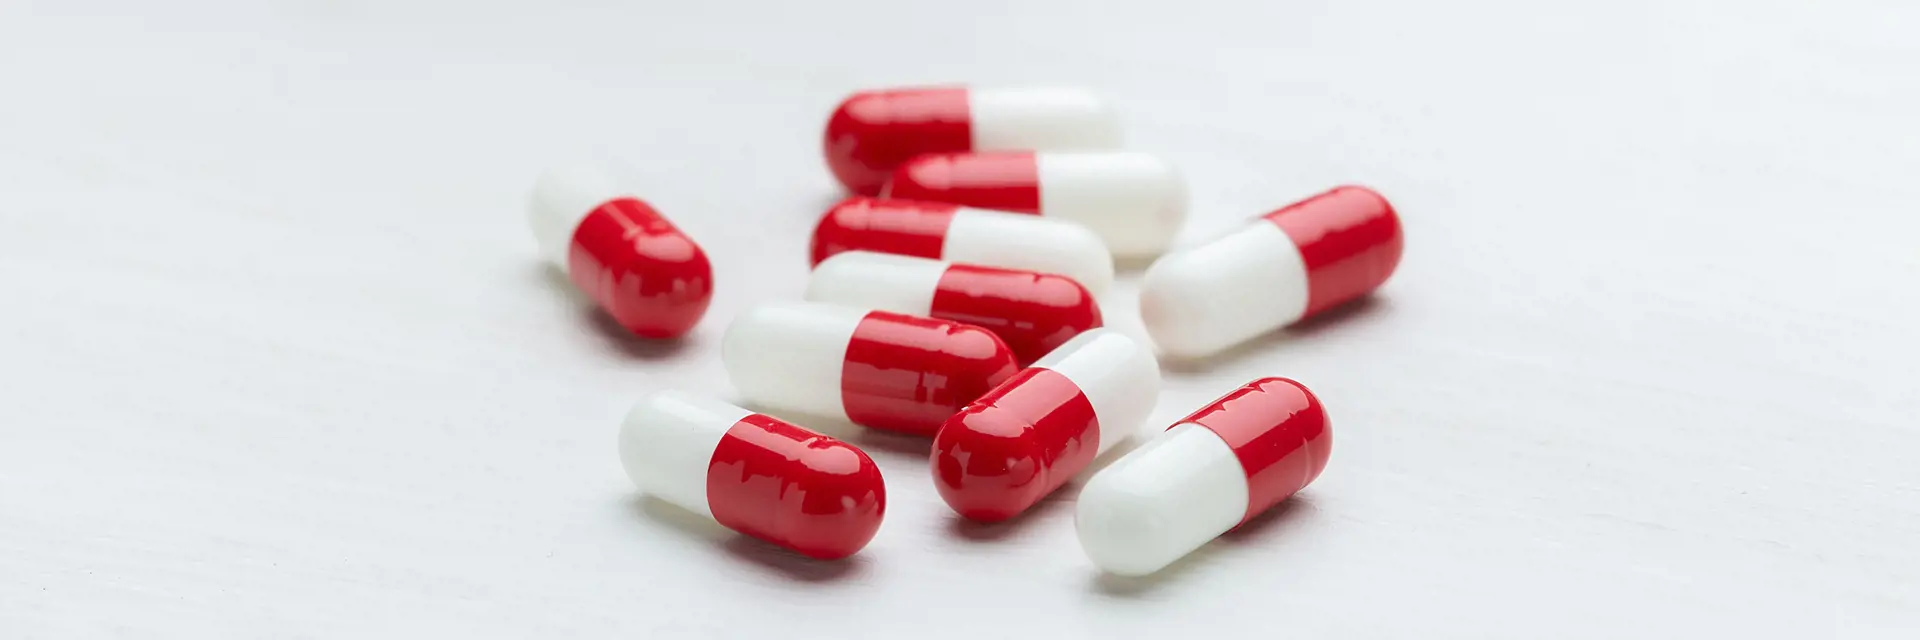 Red and white medicine capsules on a light grey background